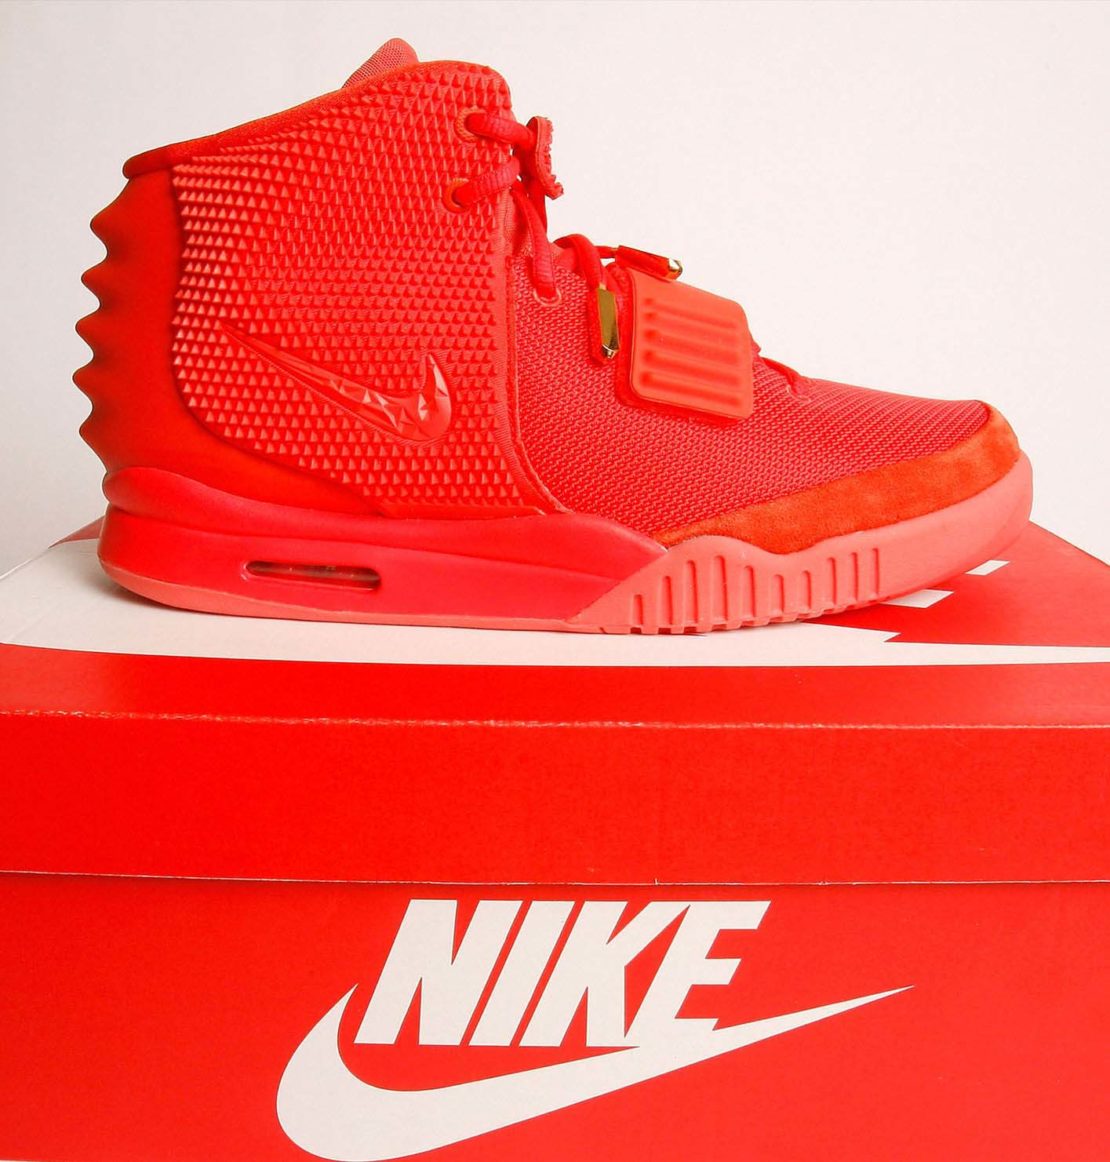 Nike's 'Yeezy' Red October trainer designed with Kanye West